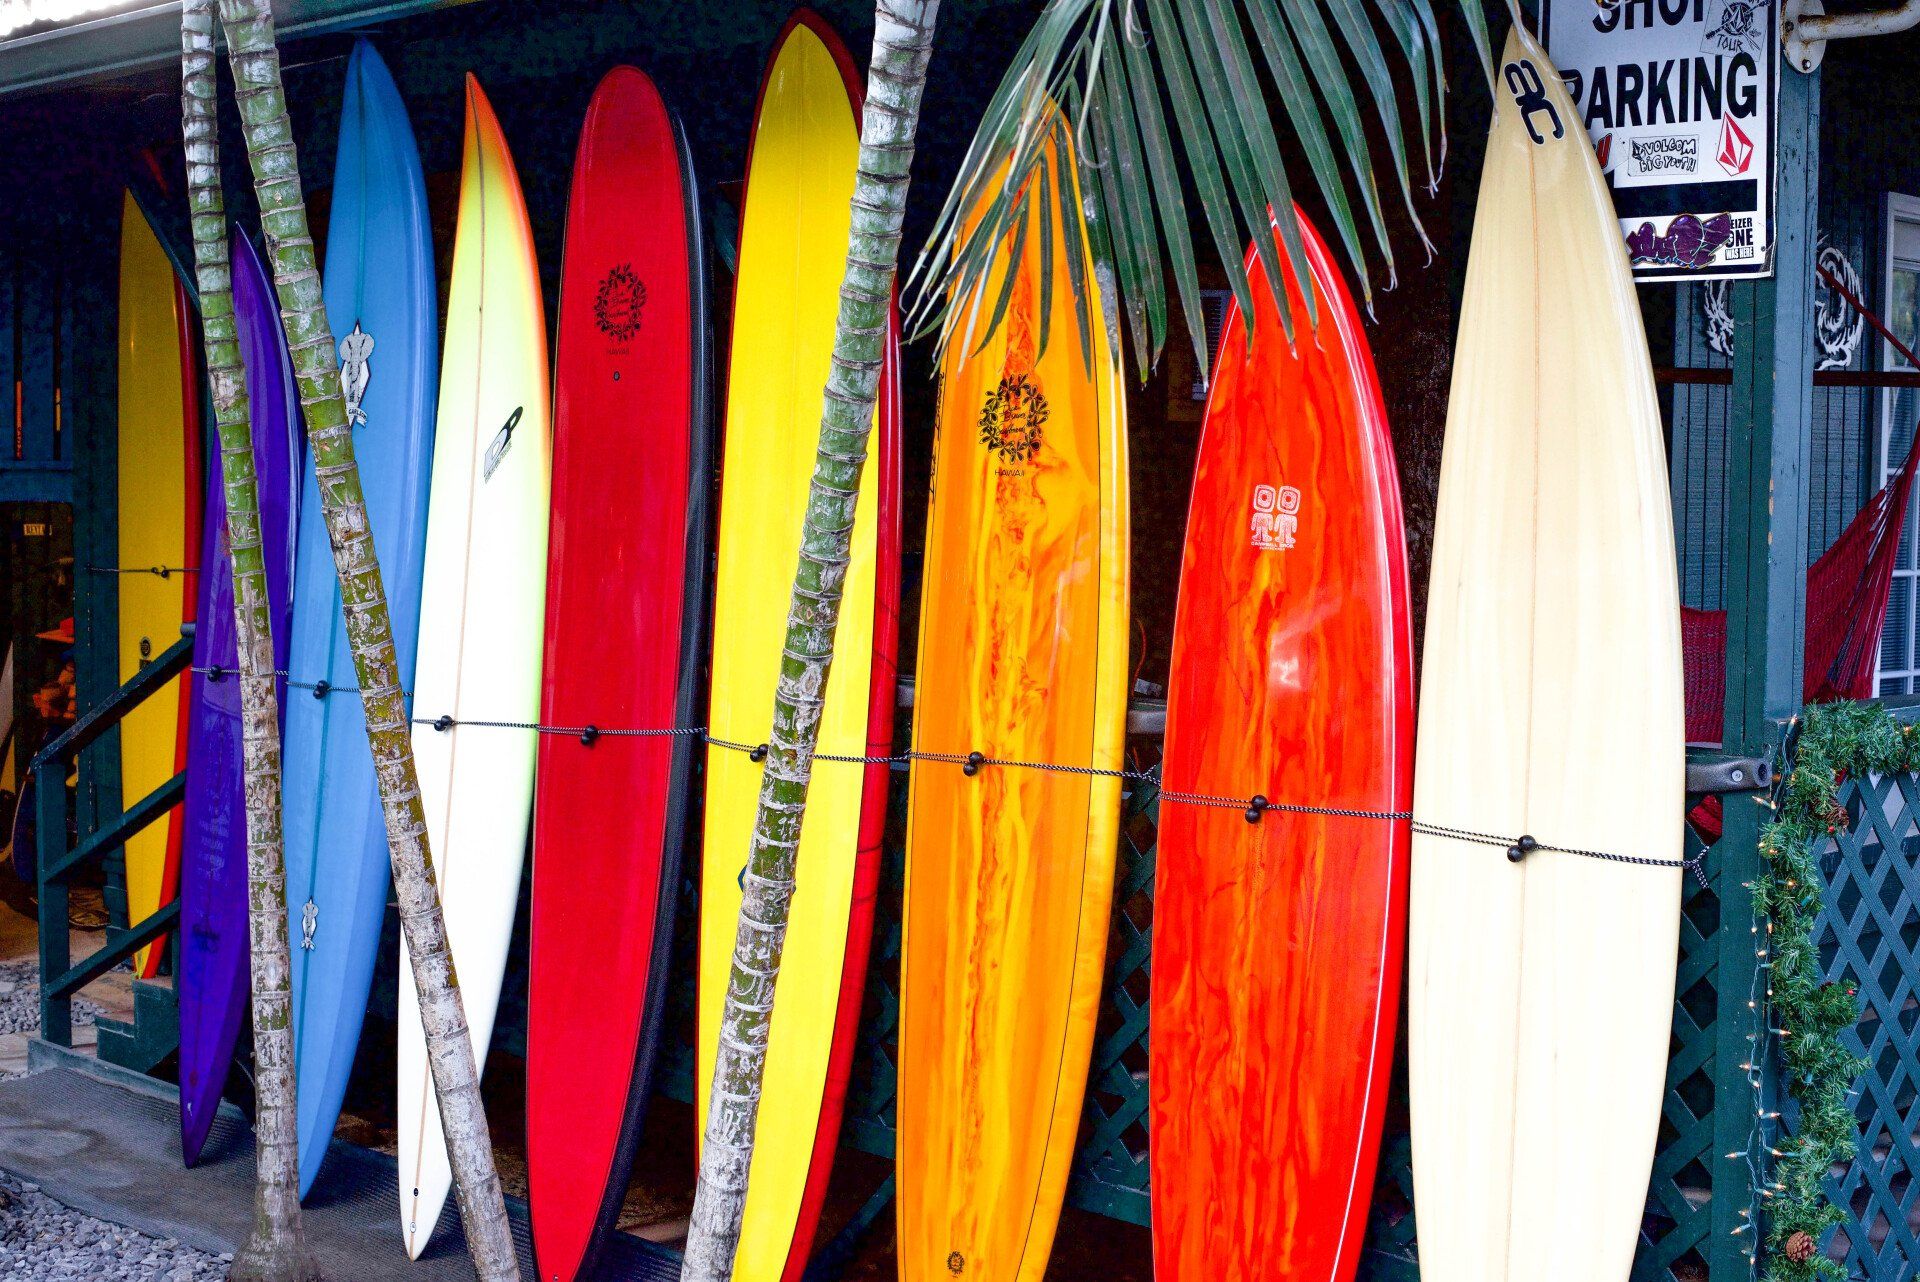 A row of colorful surfboards are lined up in front of a sign that says parking